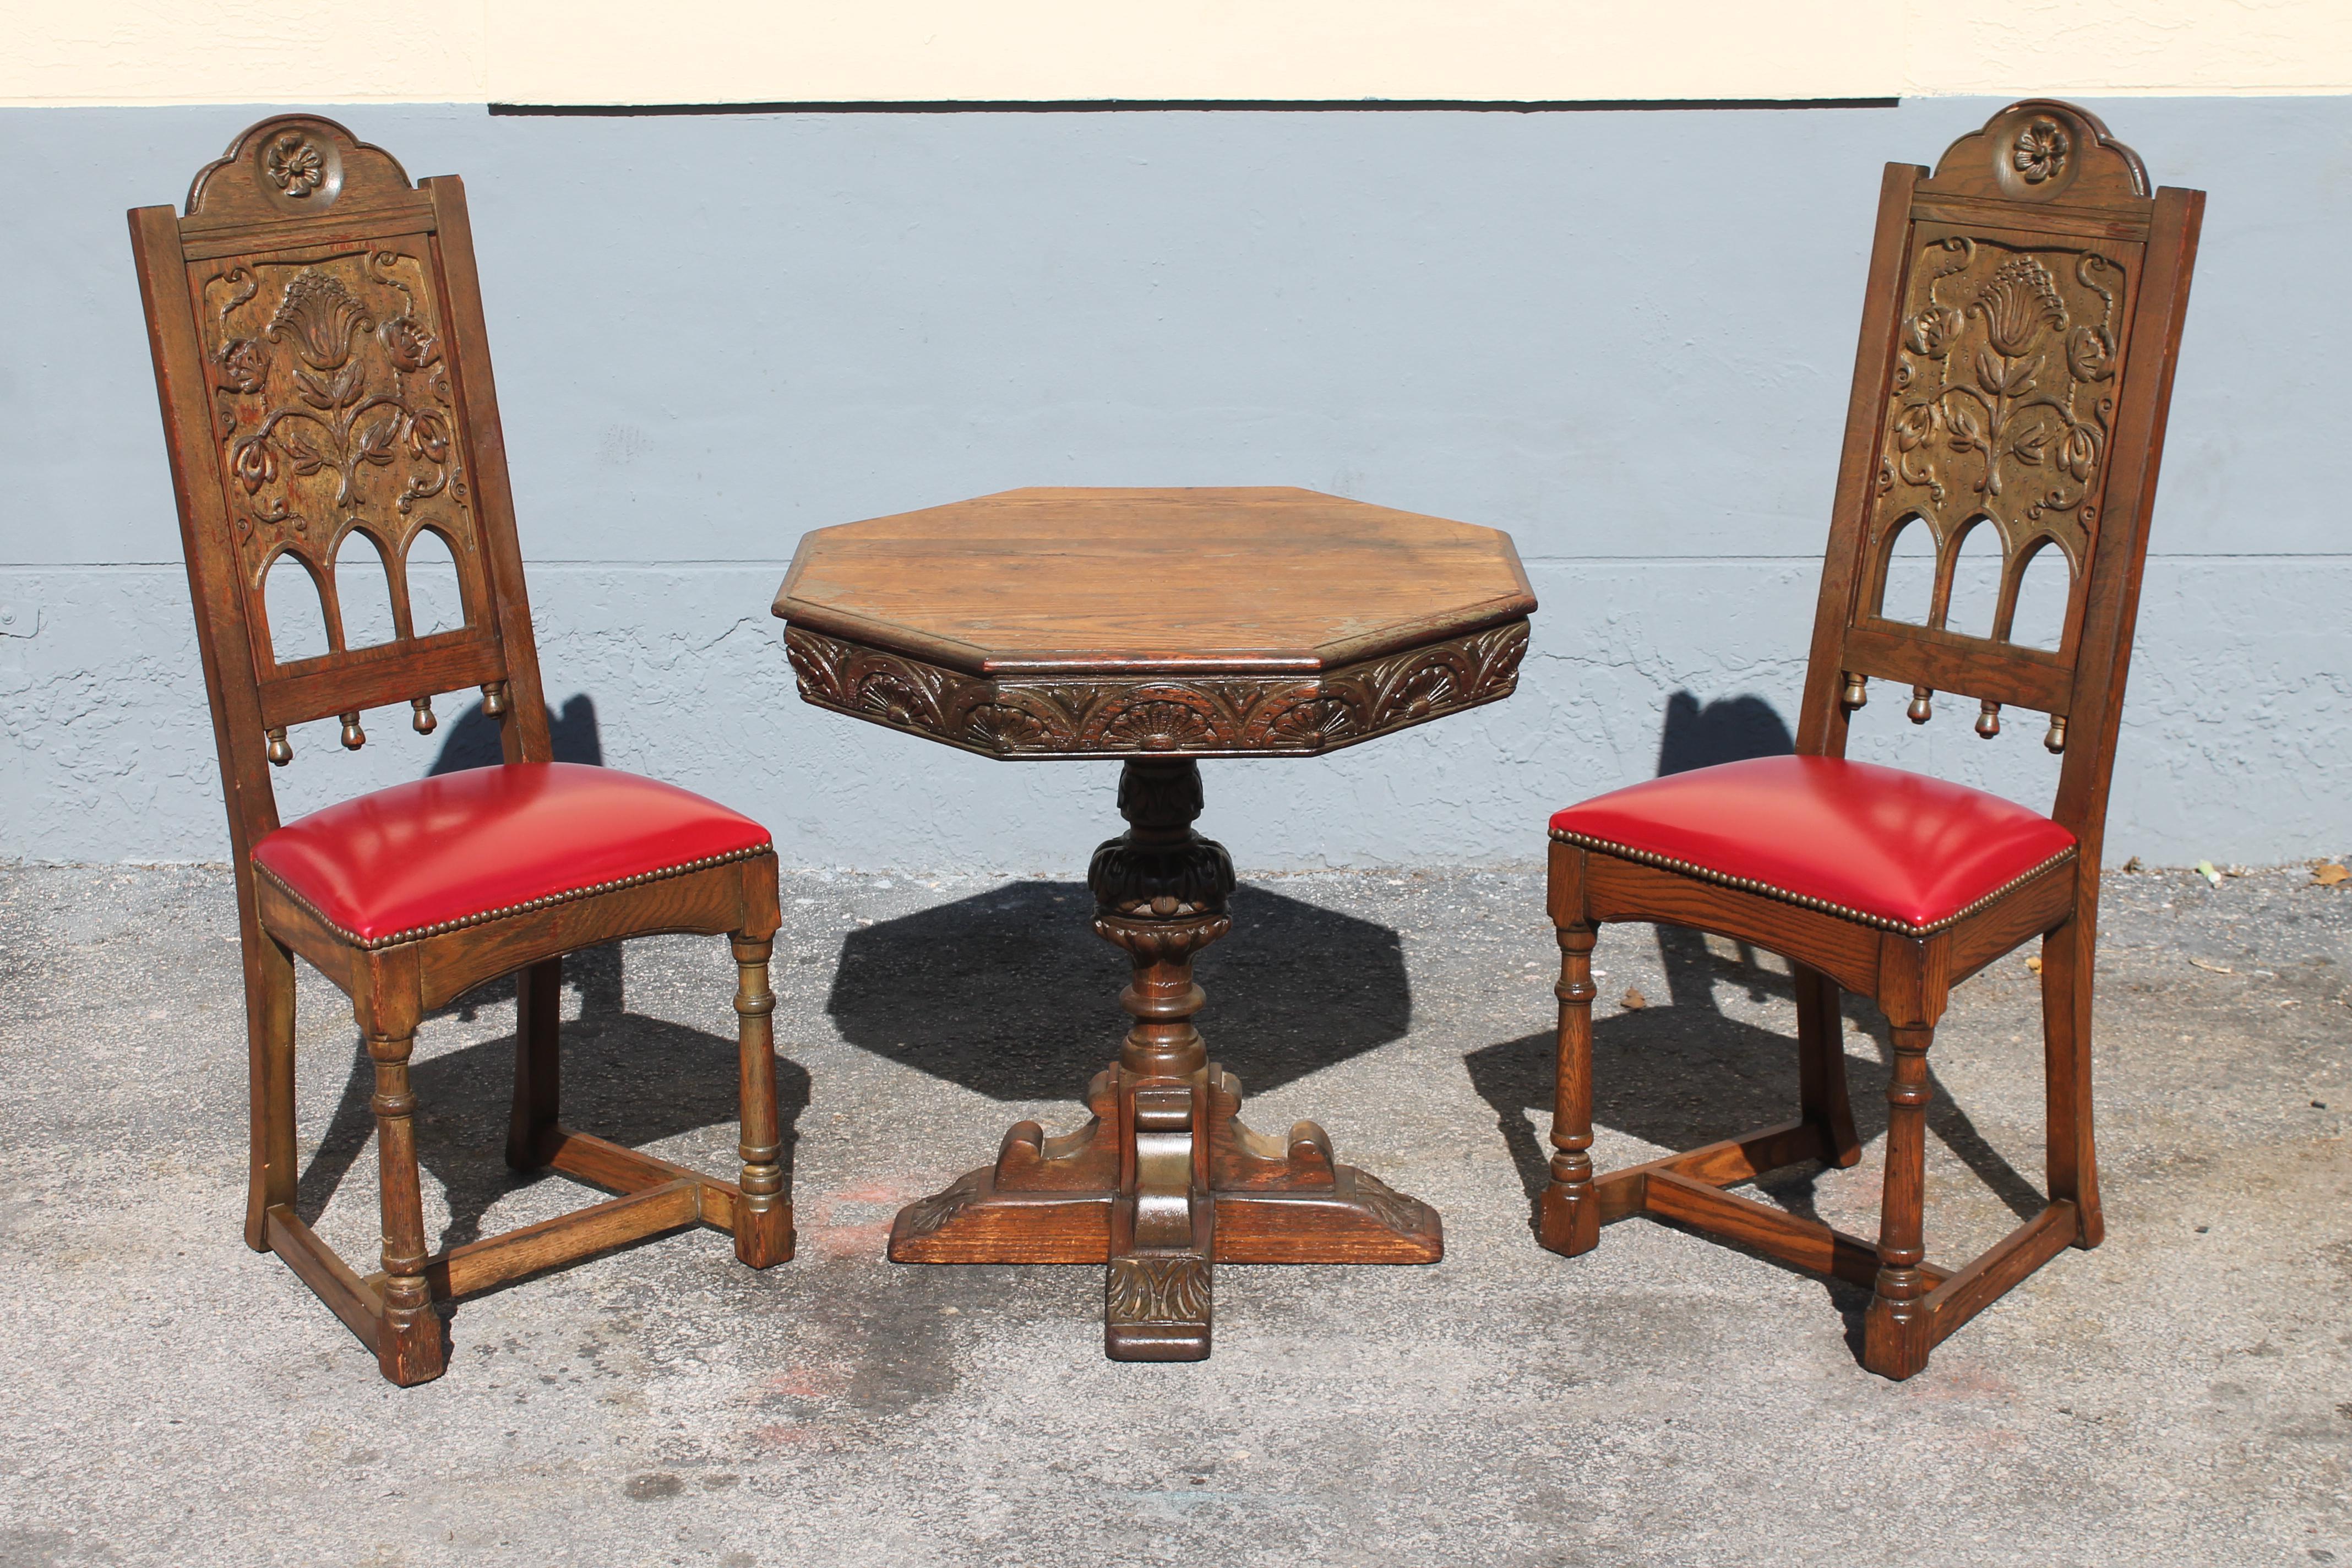 Renaissance Revival 19thc French Rennaisance Revival Carved Center Table + Pair Chairs  Set of 3 pcs For Sale